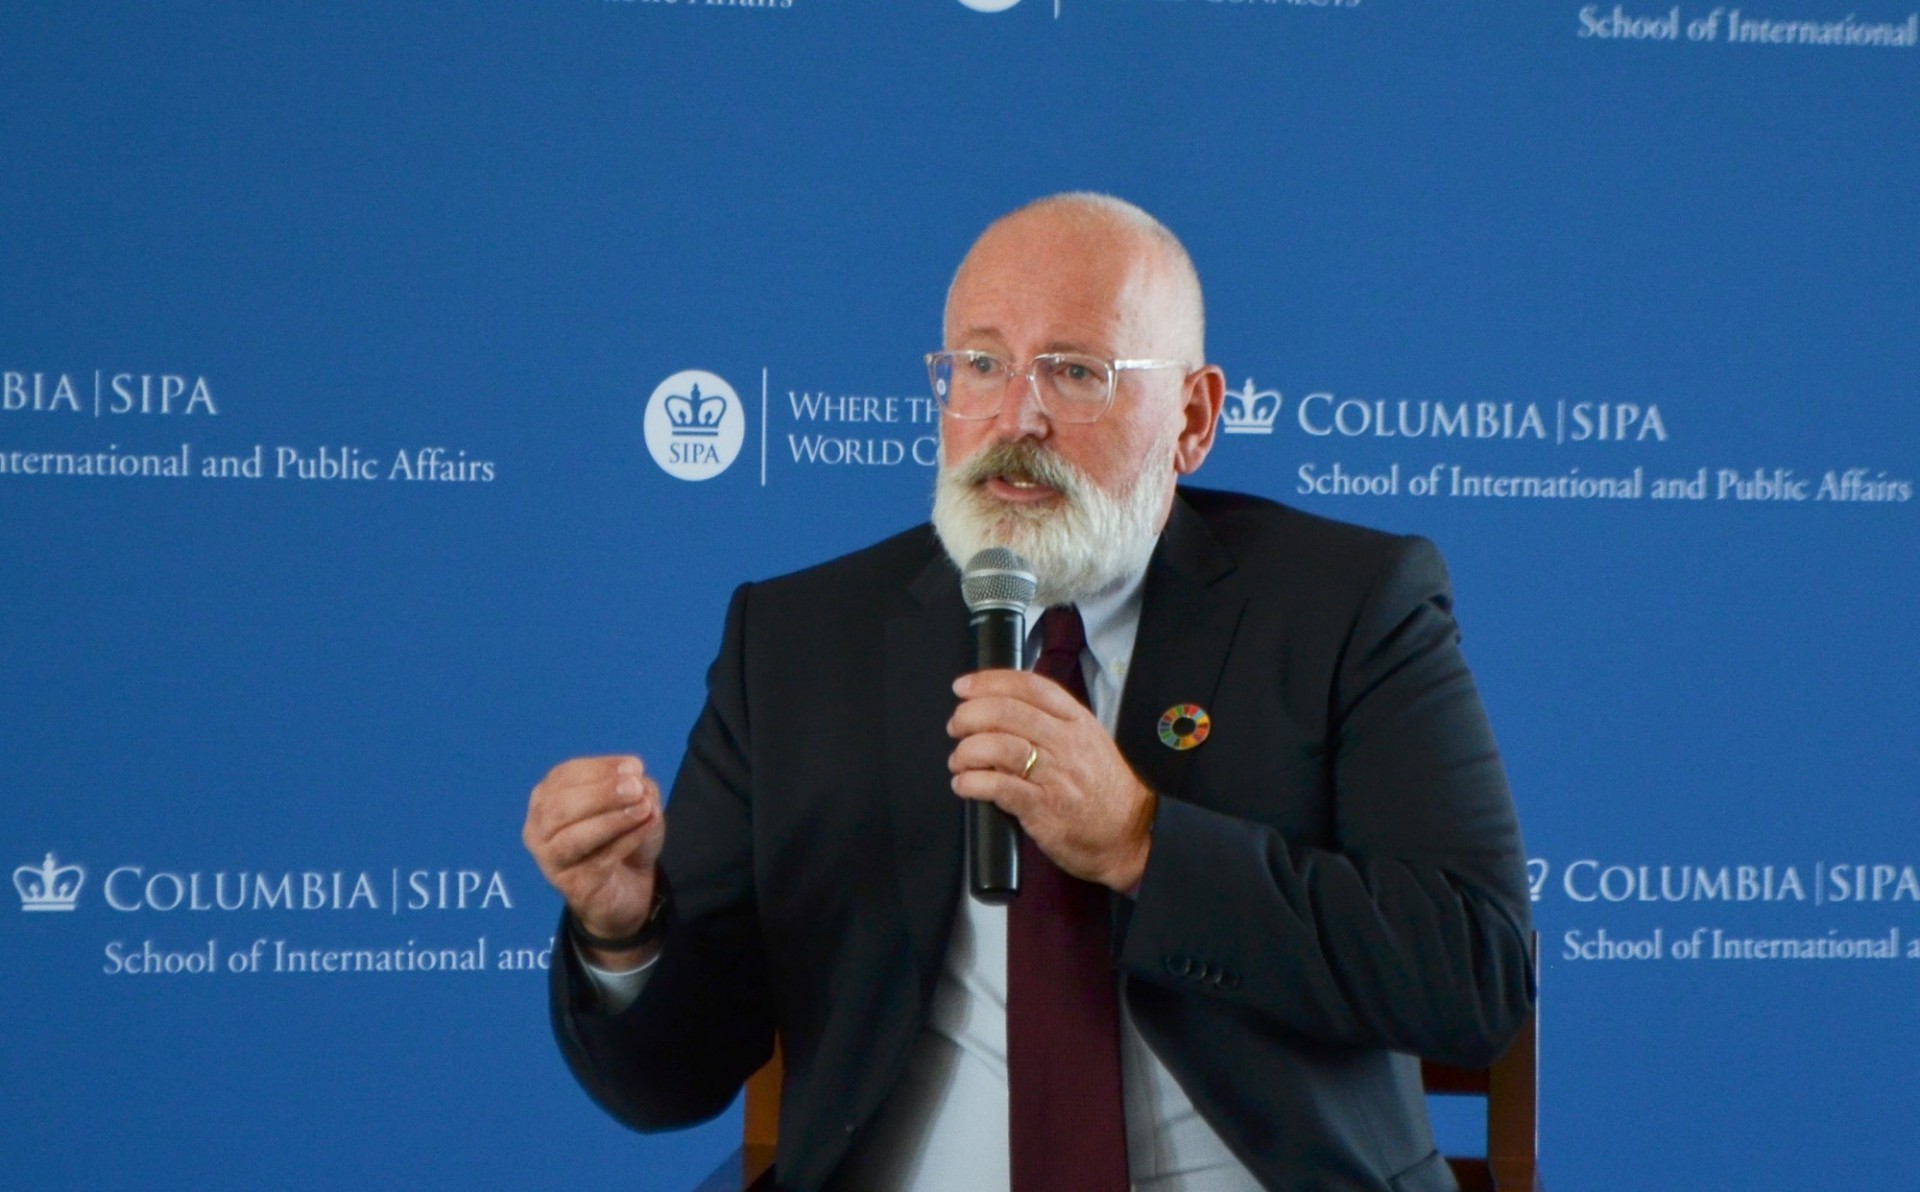 Frans Timmermarns speaks at Columbia University